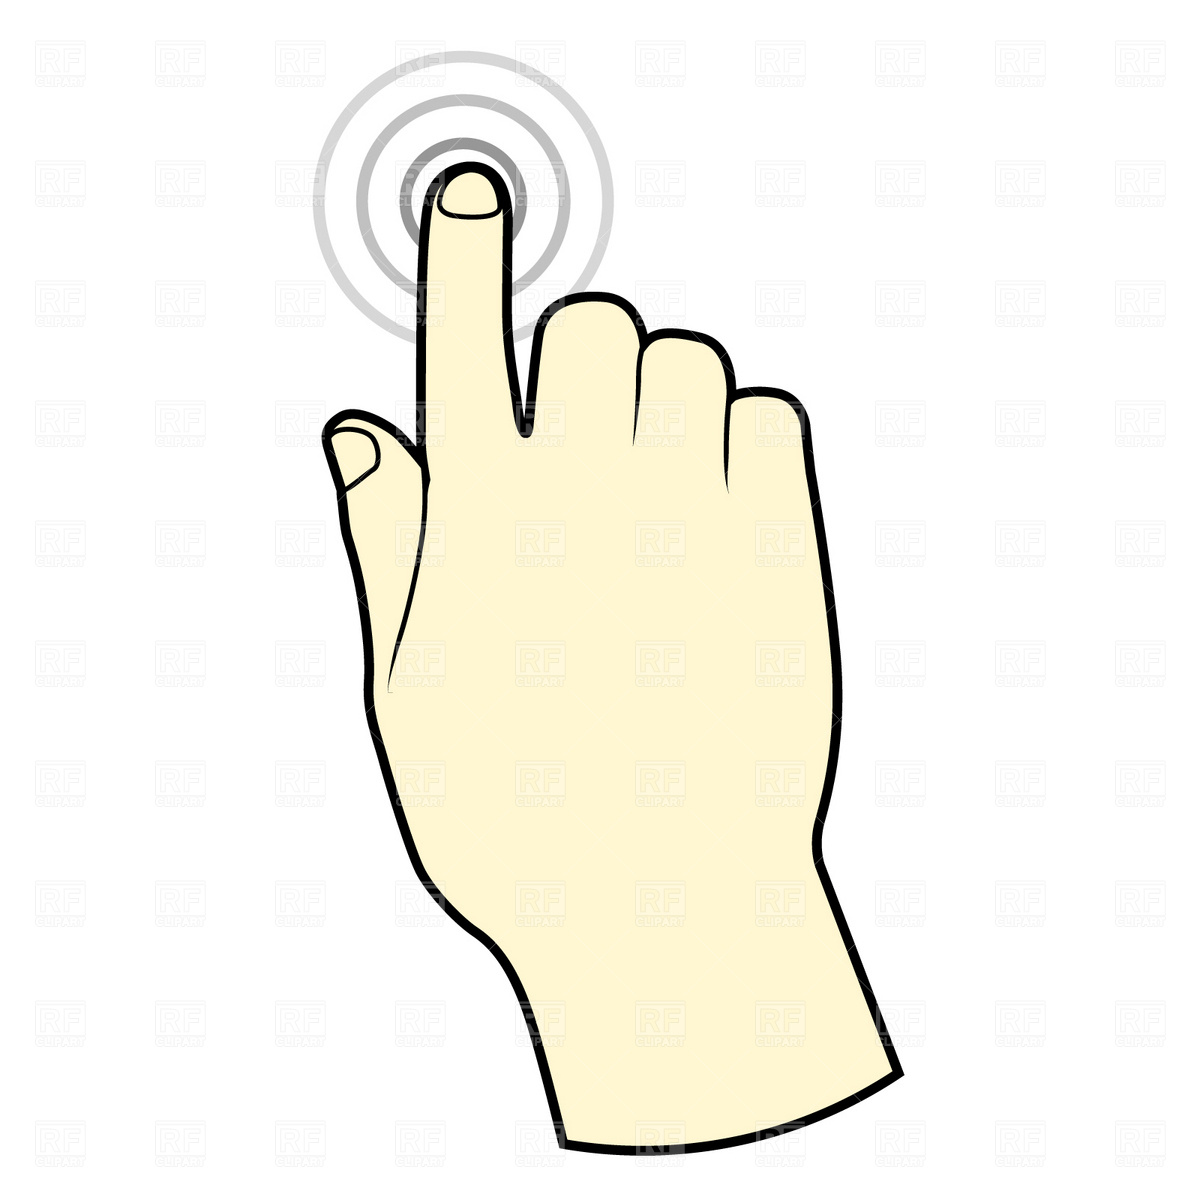 Touch screen live clipart.